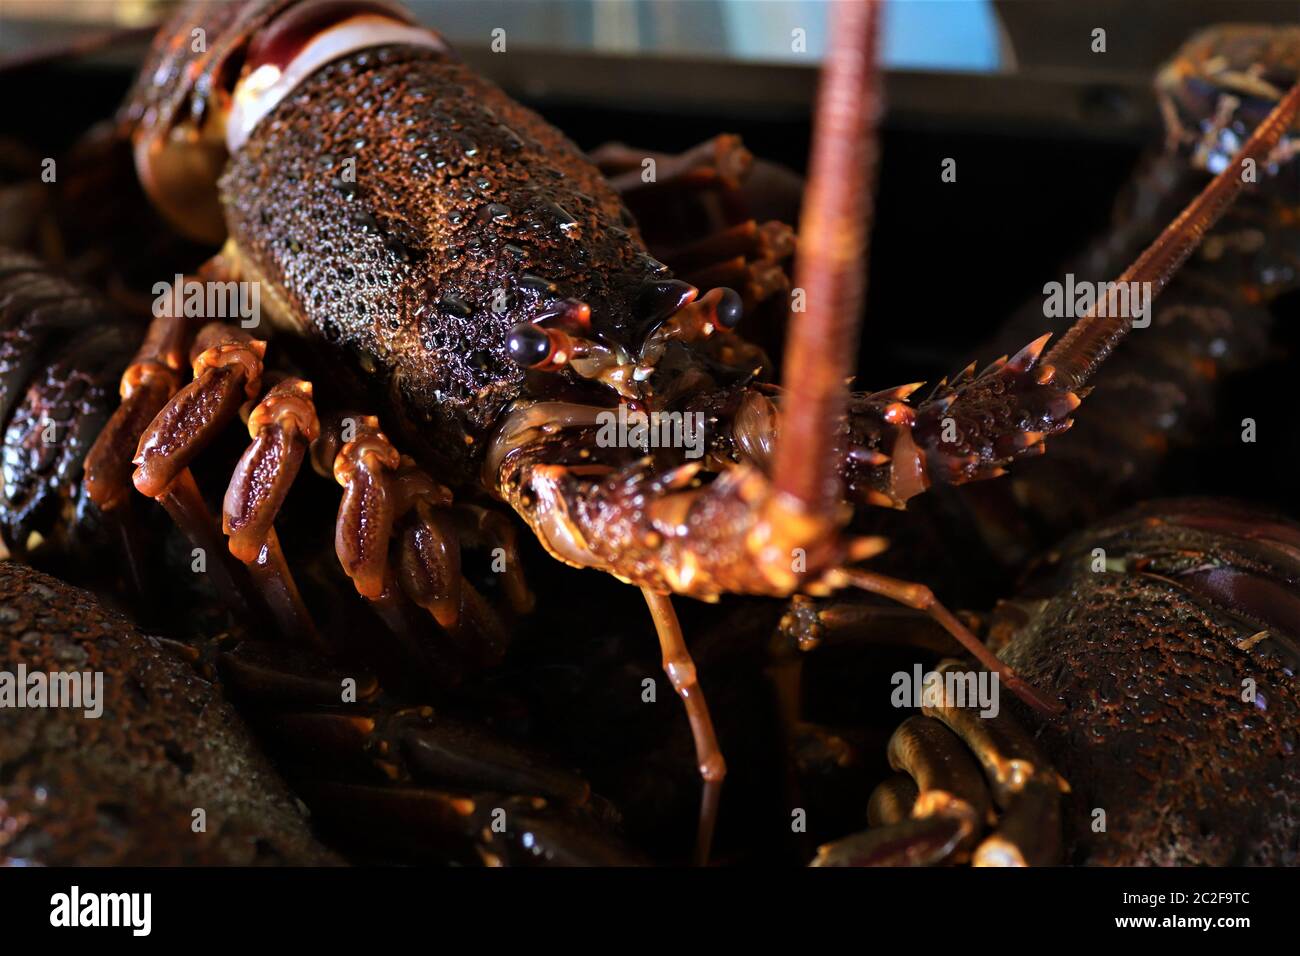 Jasus lalandii also called the Cape rock lobster or West Coast rock lobster is a species of spiny lobster found off the coast of Southern Africa.They Stock Photo